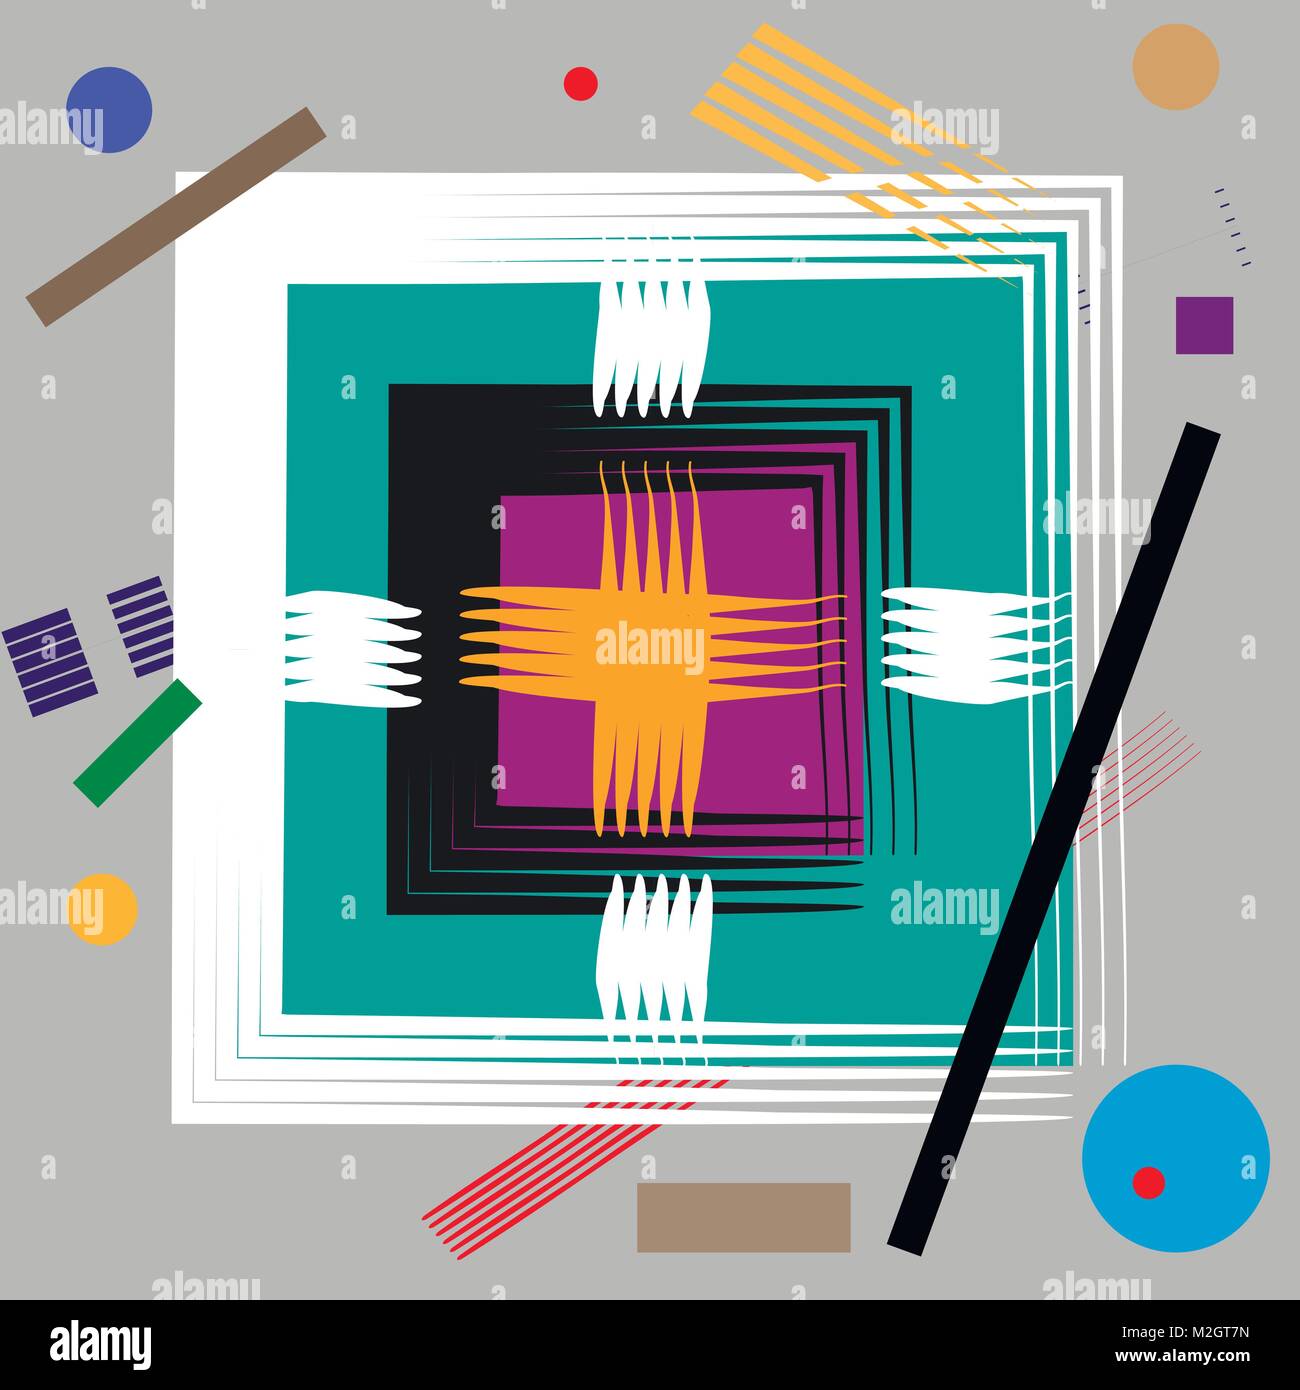 Abstract Composition in the style of Malevich. Futurism Supermatism Background. Colorful Abstract Geometric forms on gray background. Cubism, futurism Stock Vector